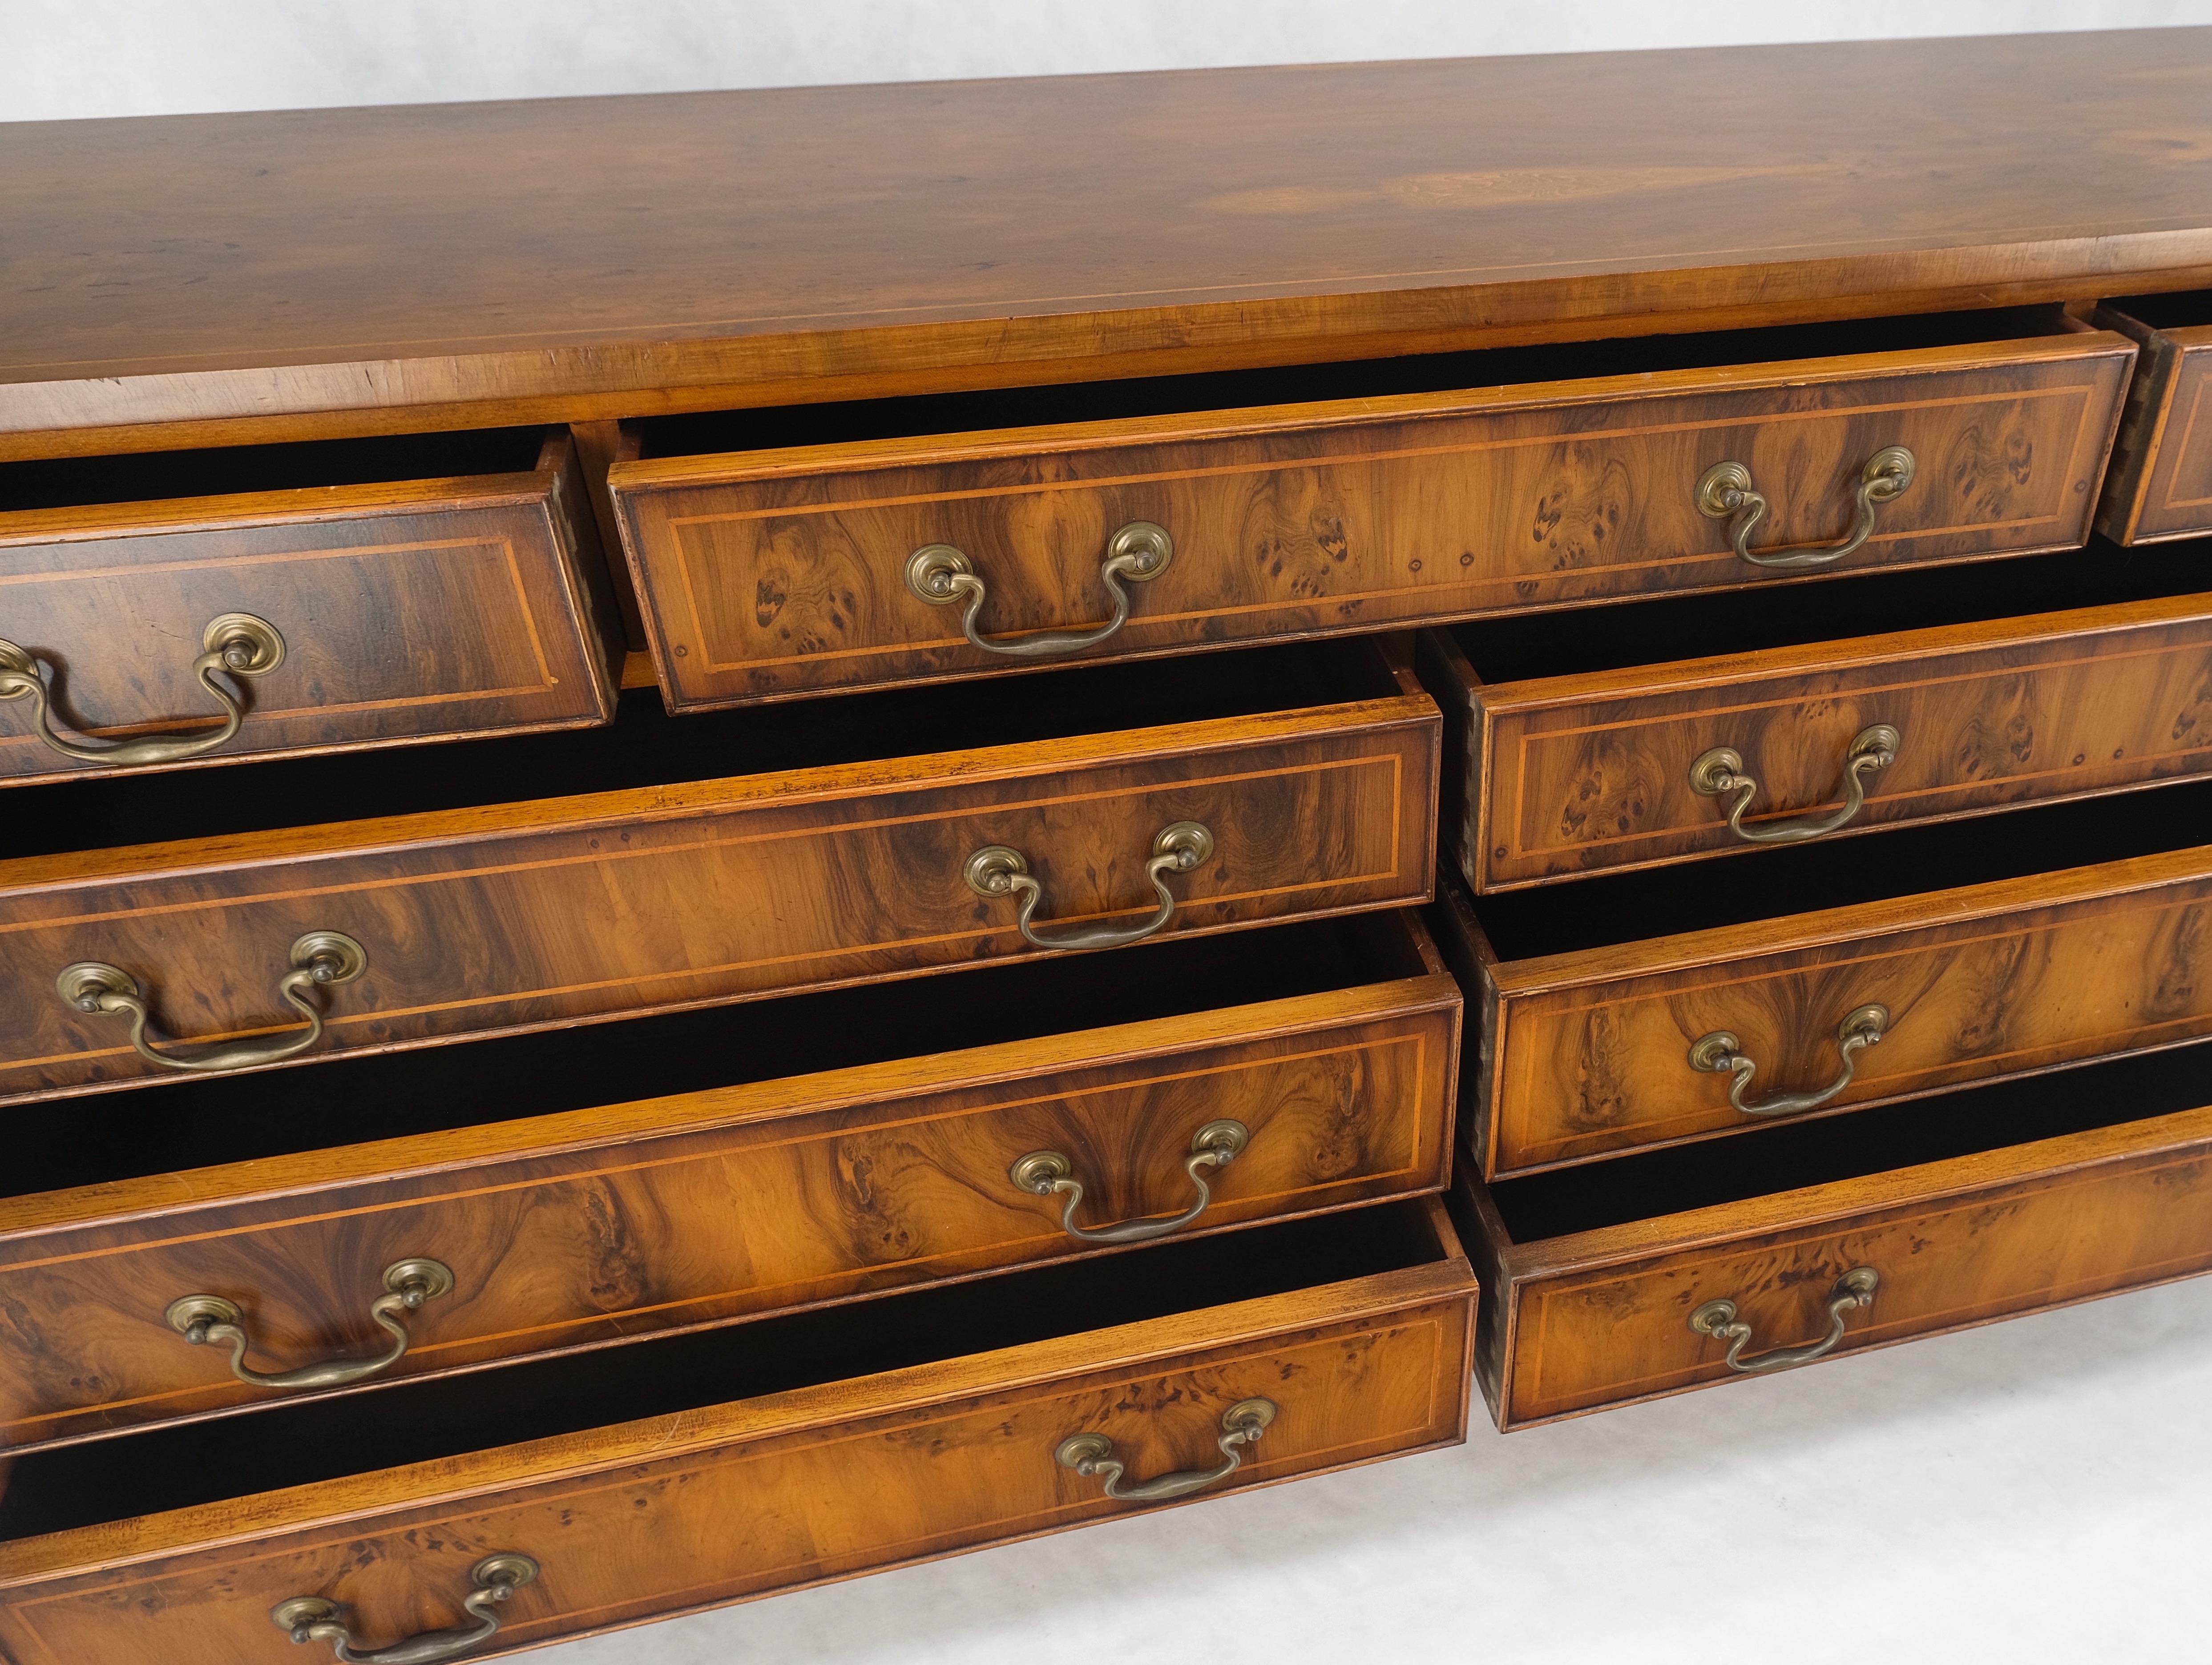 English Yew Wood Long 9 Drawers Long Pencil Inlaid Dresser Credenza Brass Drops MINT! For Sale